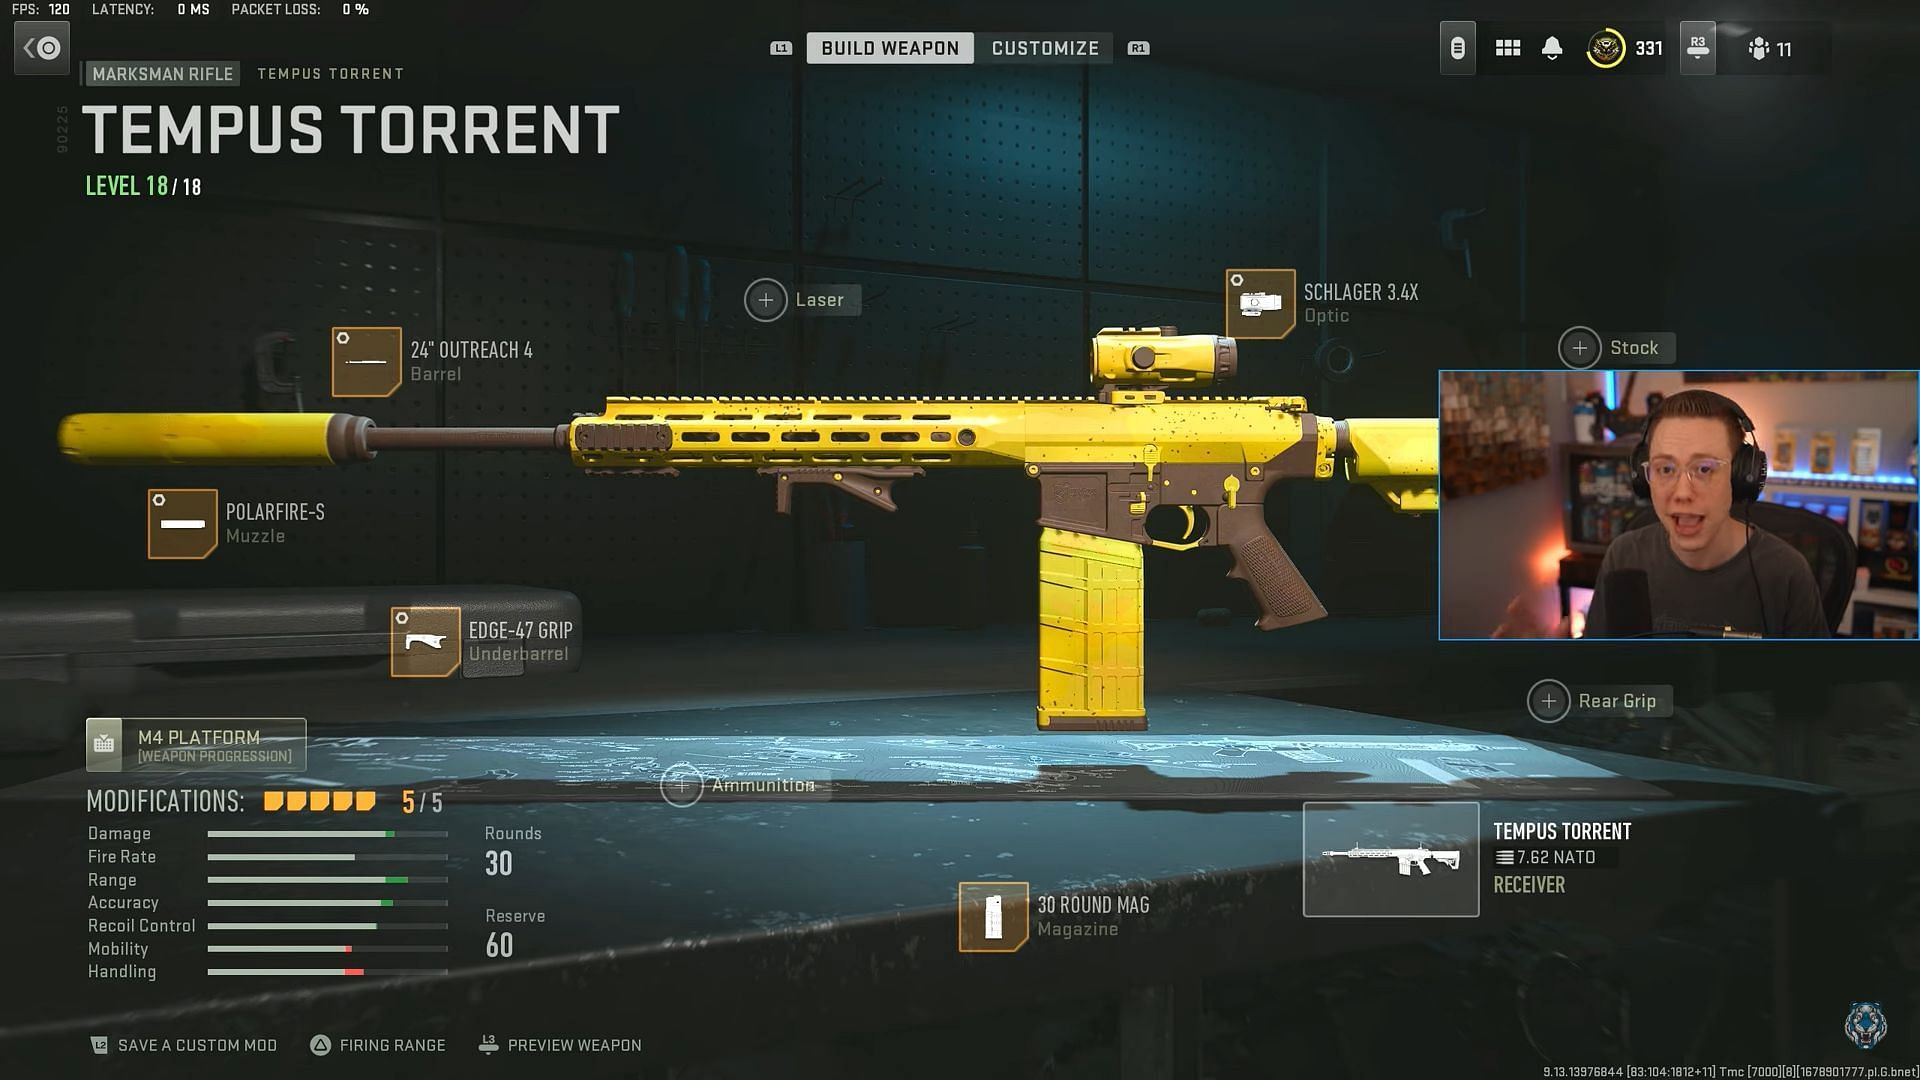 Best Tempus Torrent loadout in Warzone 2 Season 2 Reloaded (Image via Activision and YouTube/WhosImmortal)